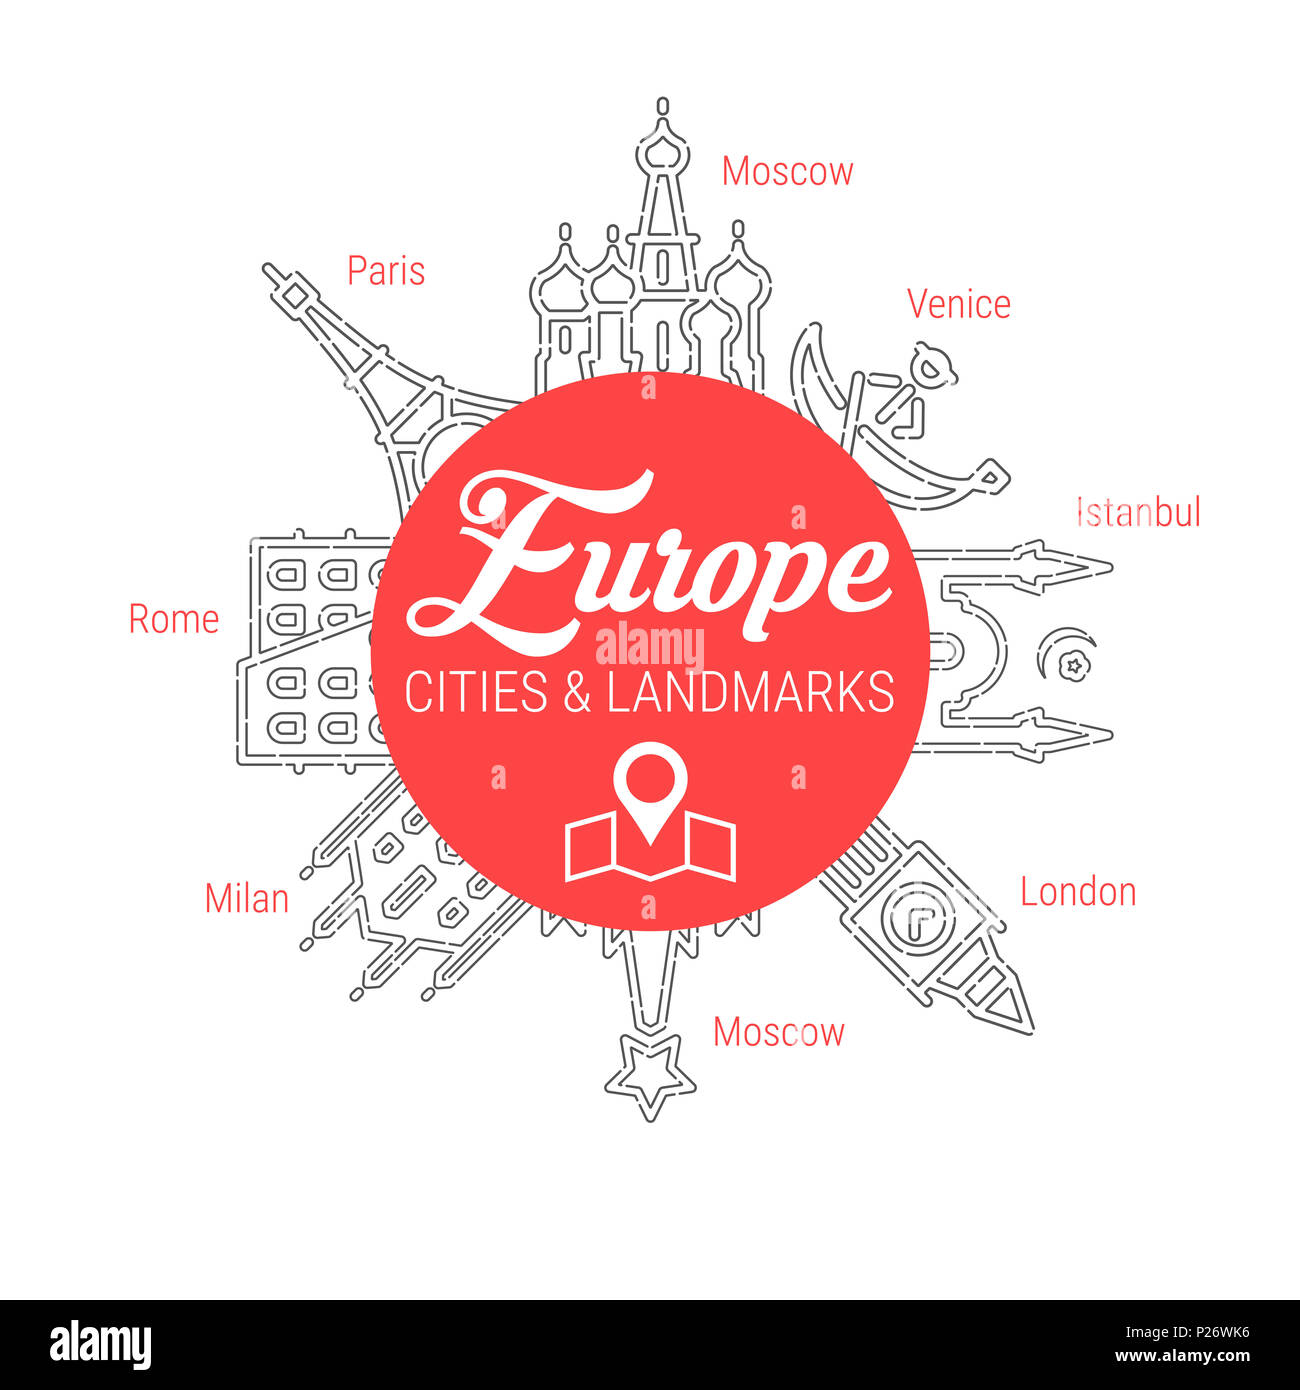 Famous European Cities - Landmarks - Places of Interest - Attractions - Sights - Lions. Line Icon Set. Travel and Tourism Background. Stock Photo